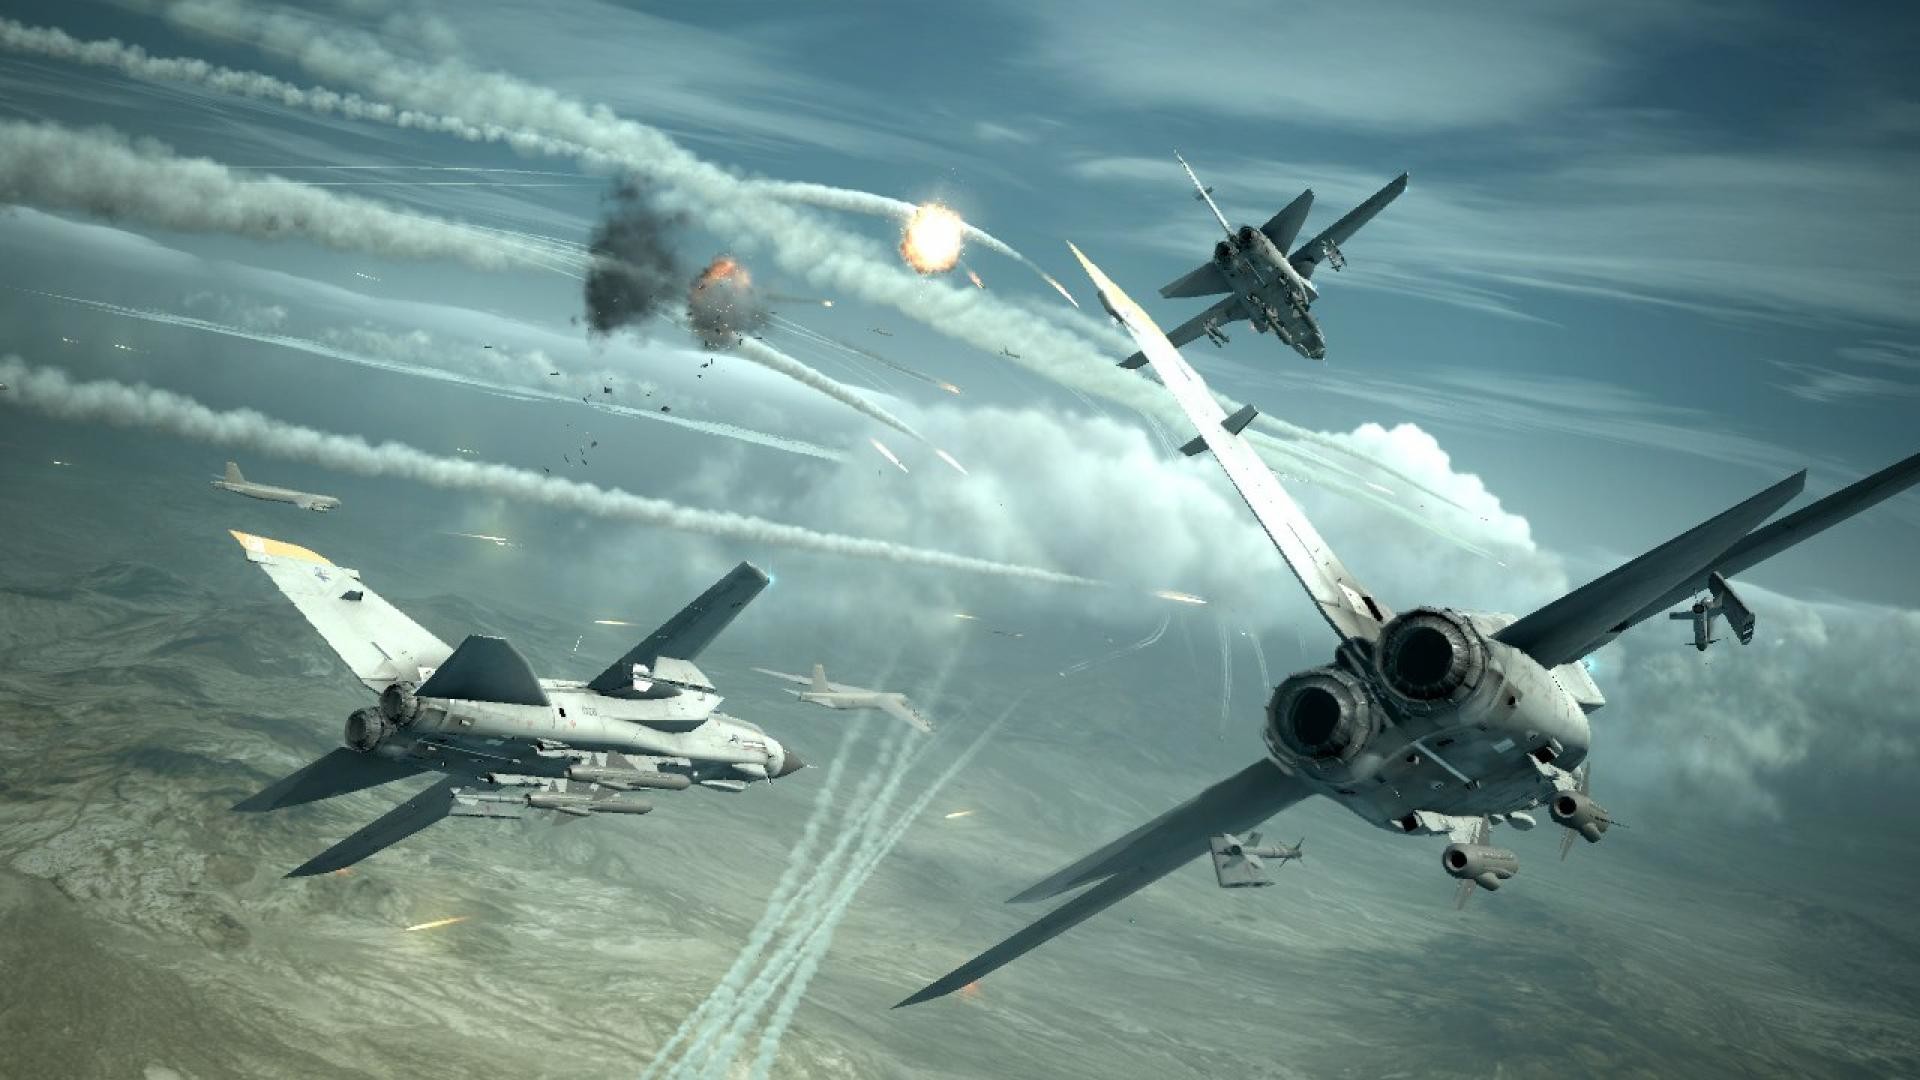 1920x1080 ... Ace Combat Super High Quality Wallpapers - LUU-HD Widescreen Images ...